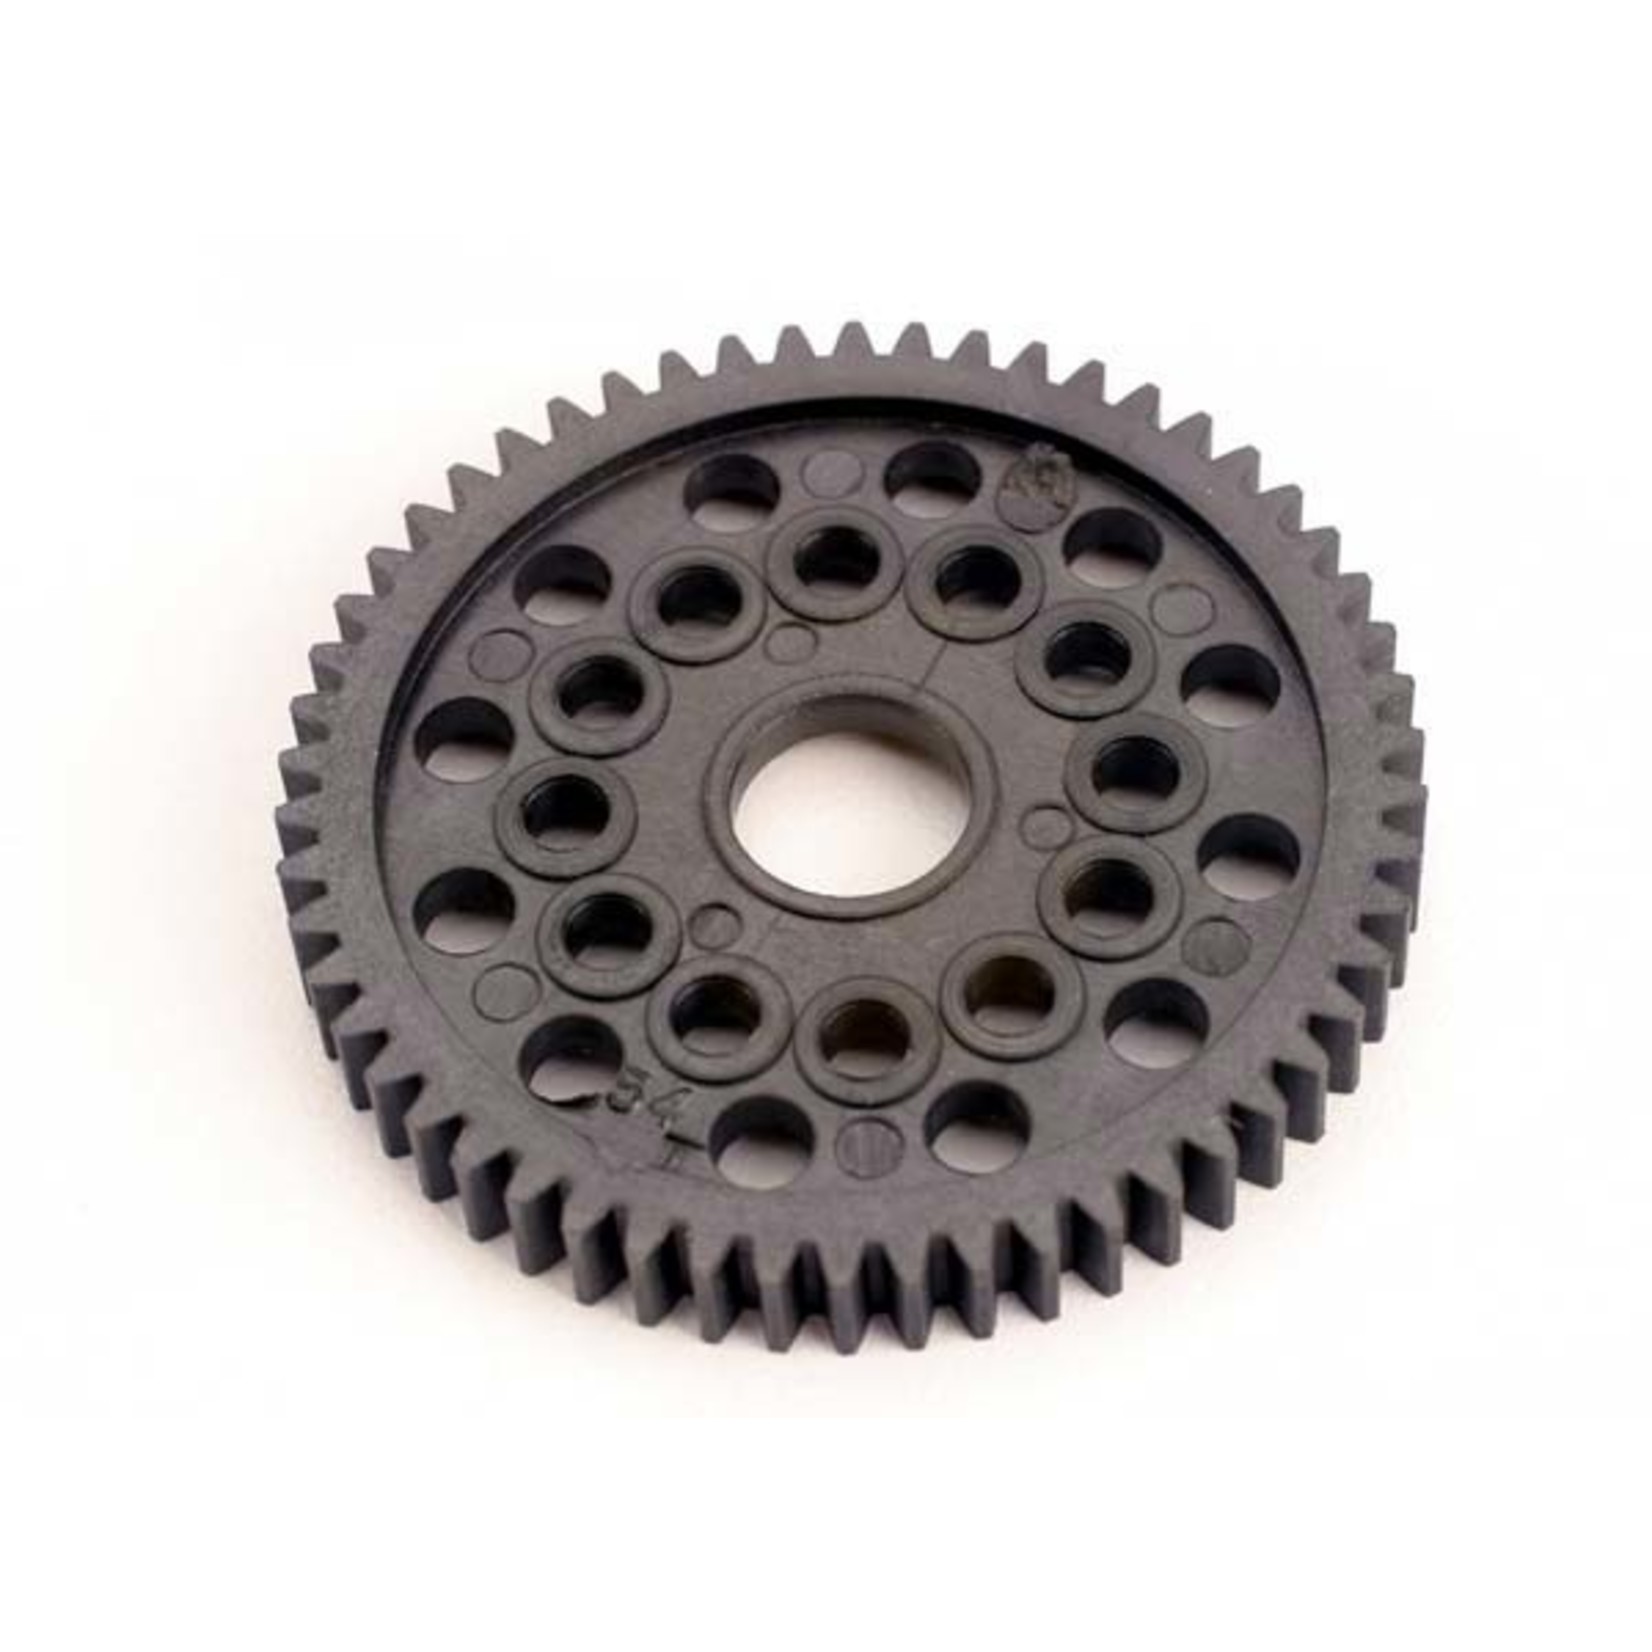 Traxxas 3454 - Spur gear (54-tooth) (32-pitch) w/bushing